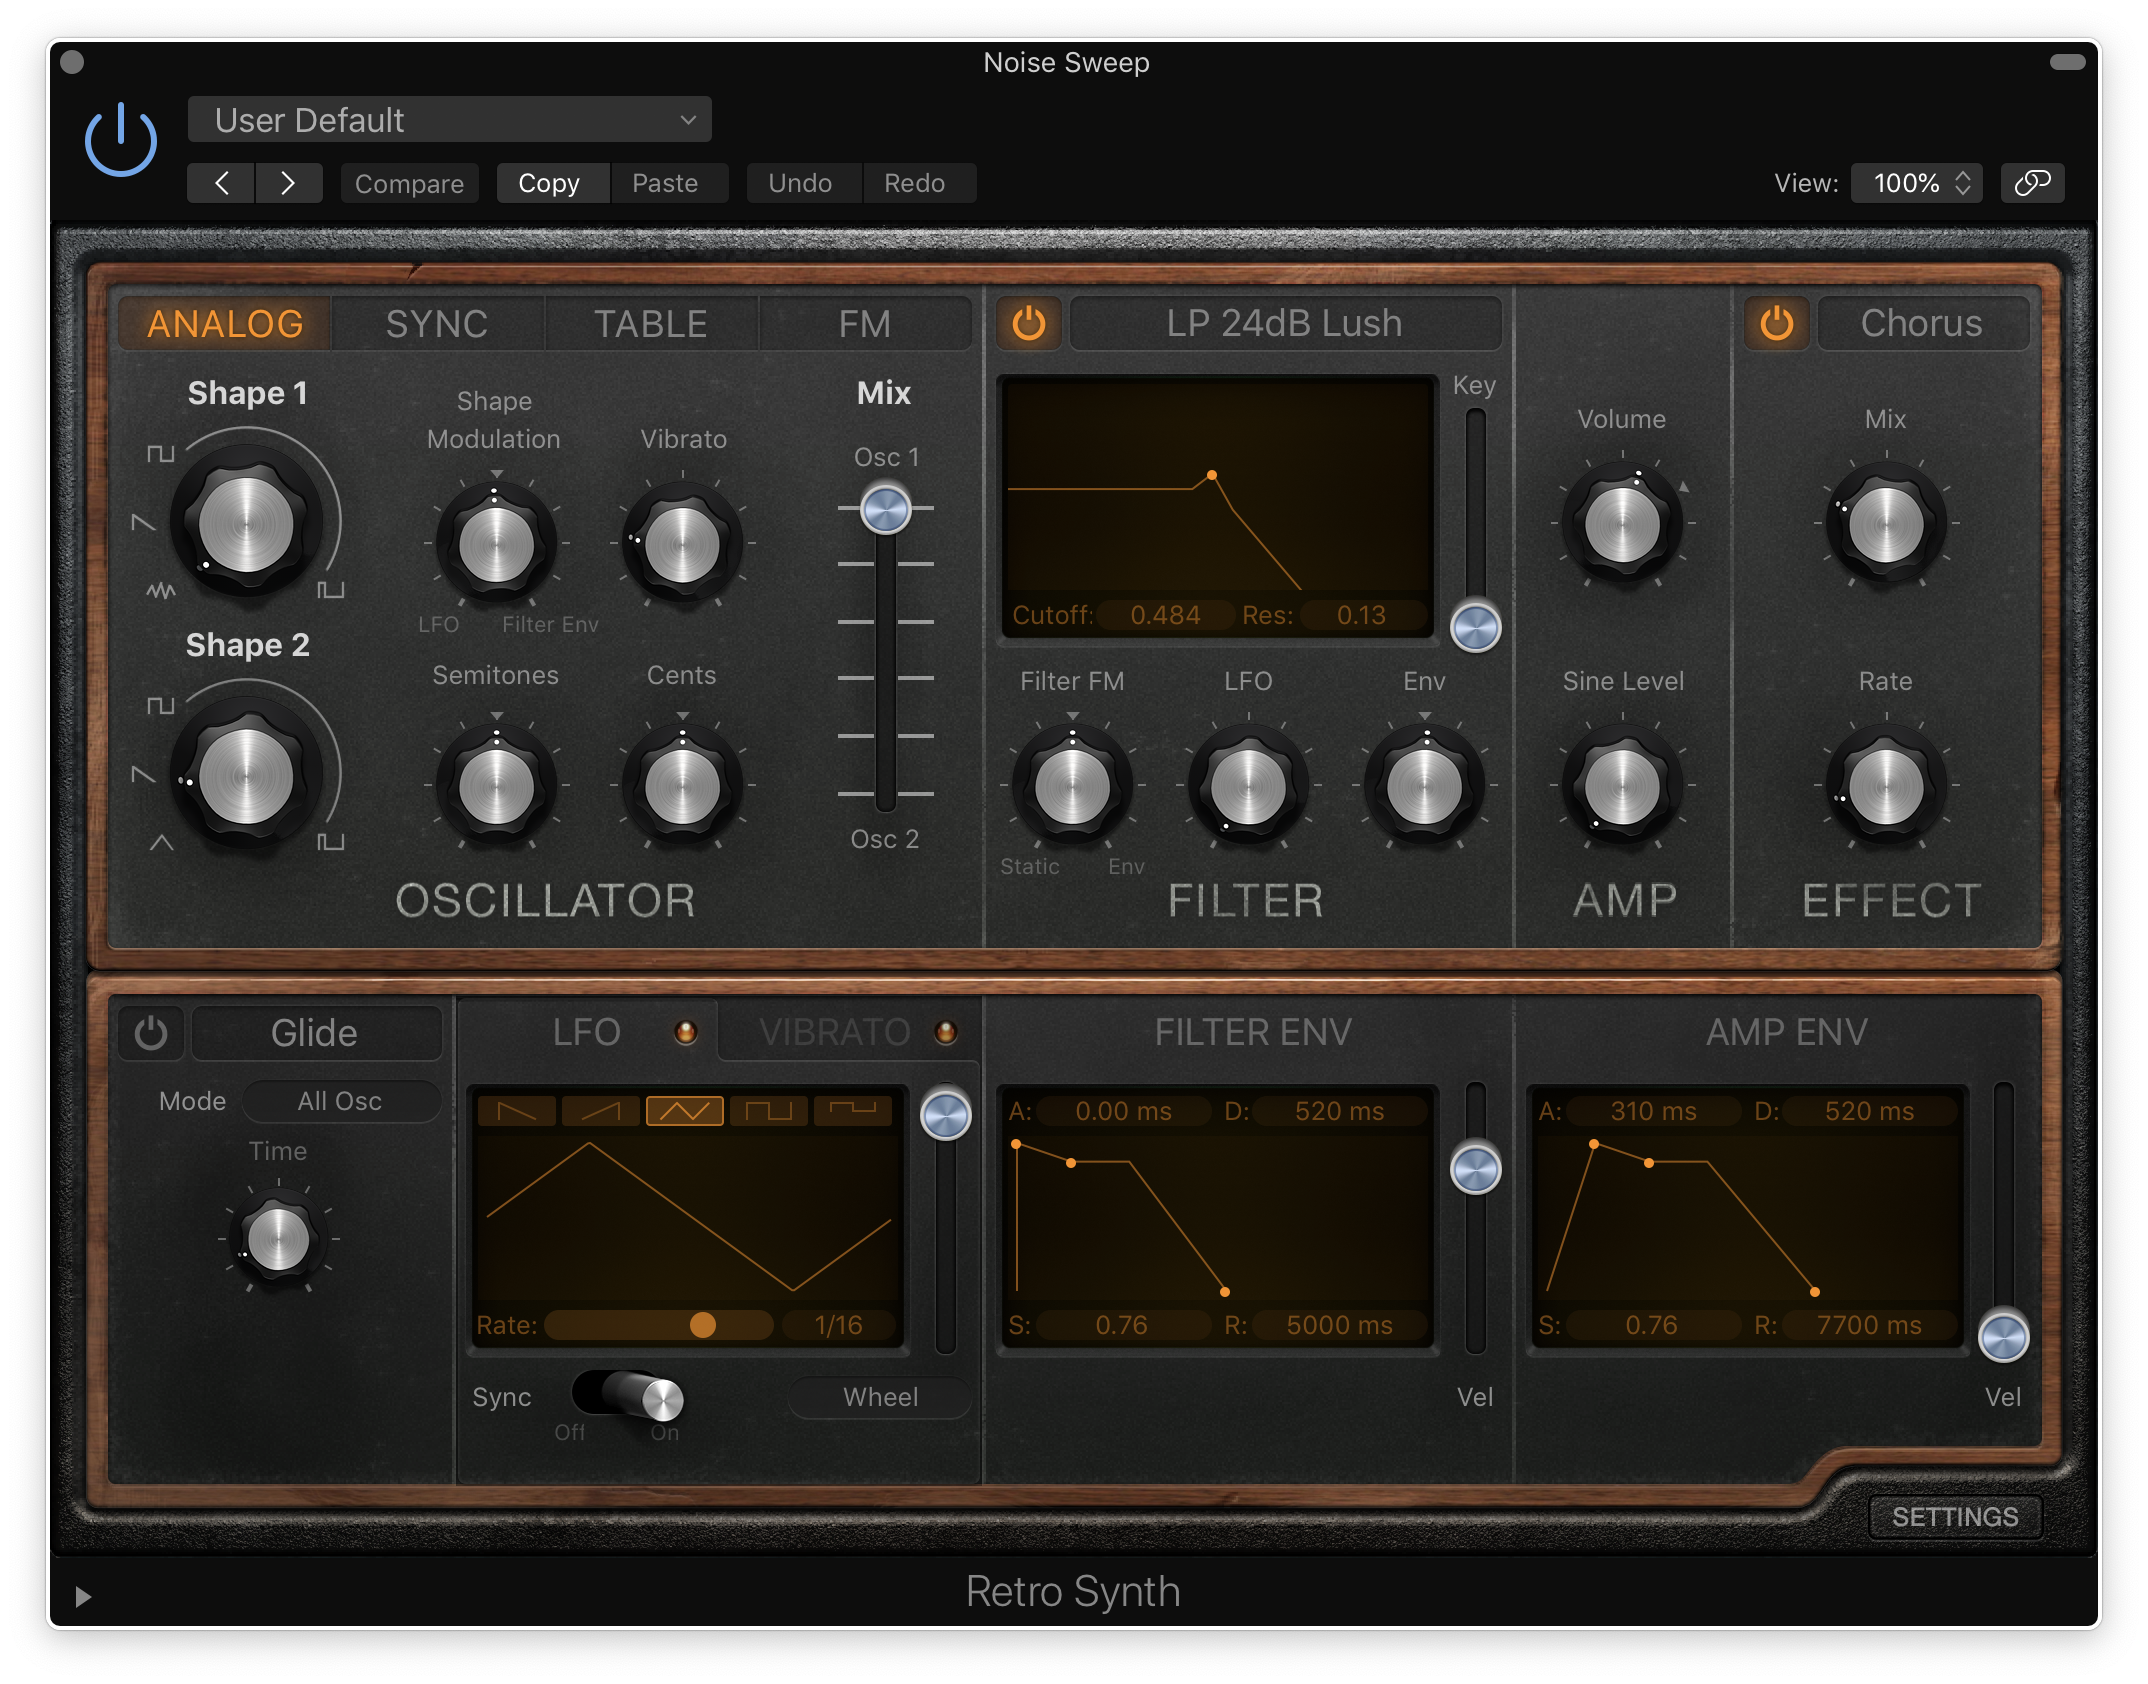 Retro Synth is an under-appreciate tool in Logic’s amazing arsenal of stock instruments.